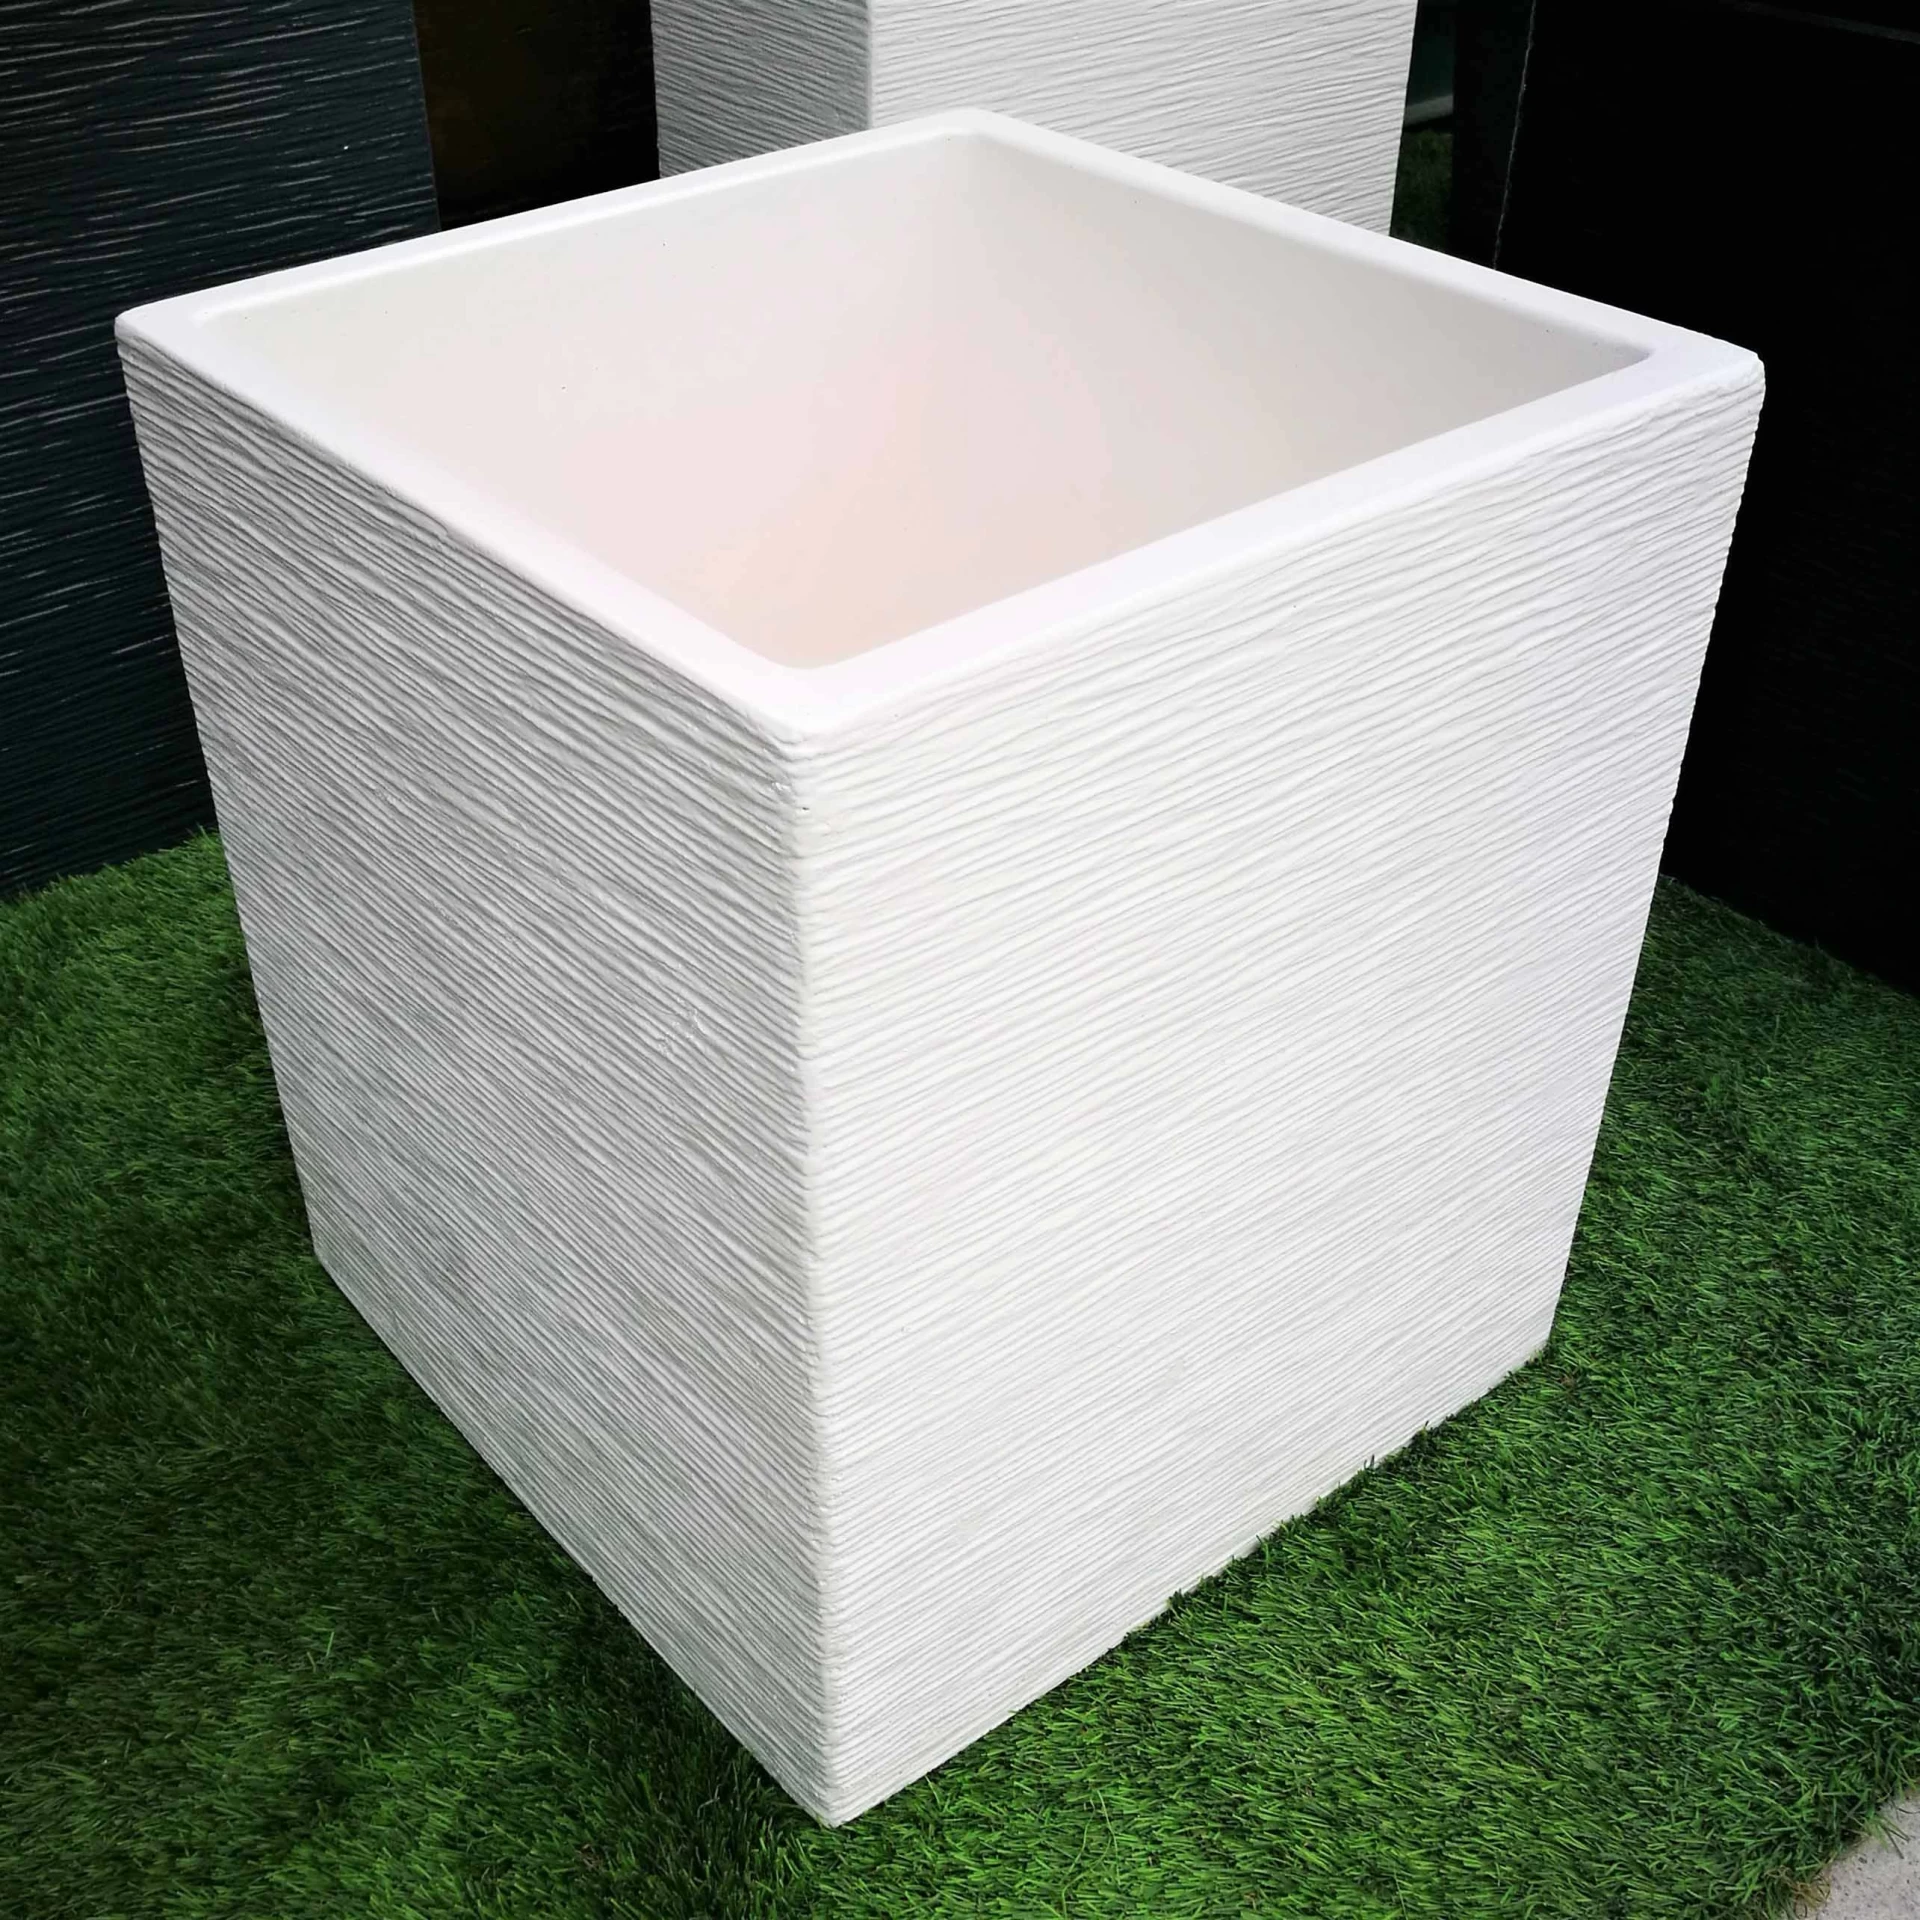 Cube Vase – Finish. Scratched